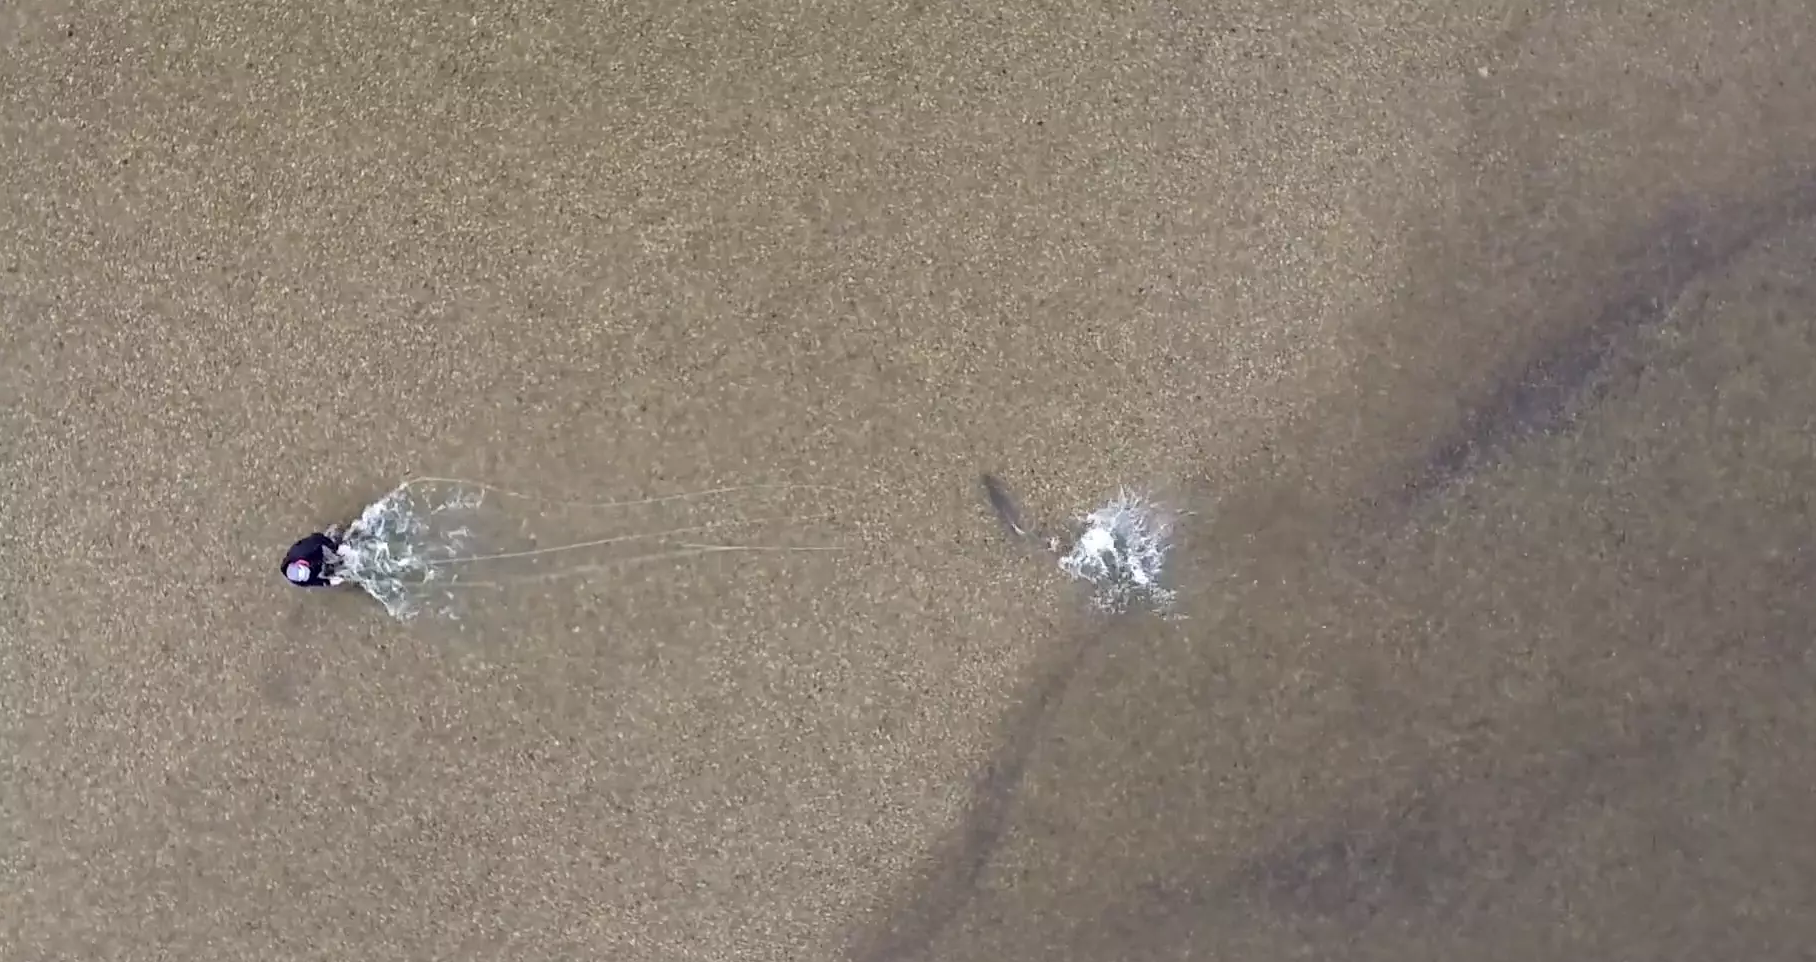 WATCH: Huge Taimen Hits Fly In Crystal Clear Water